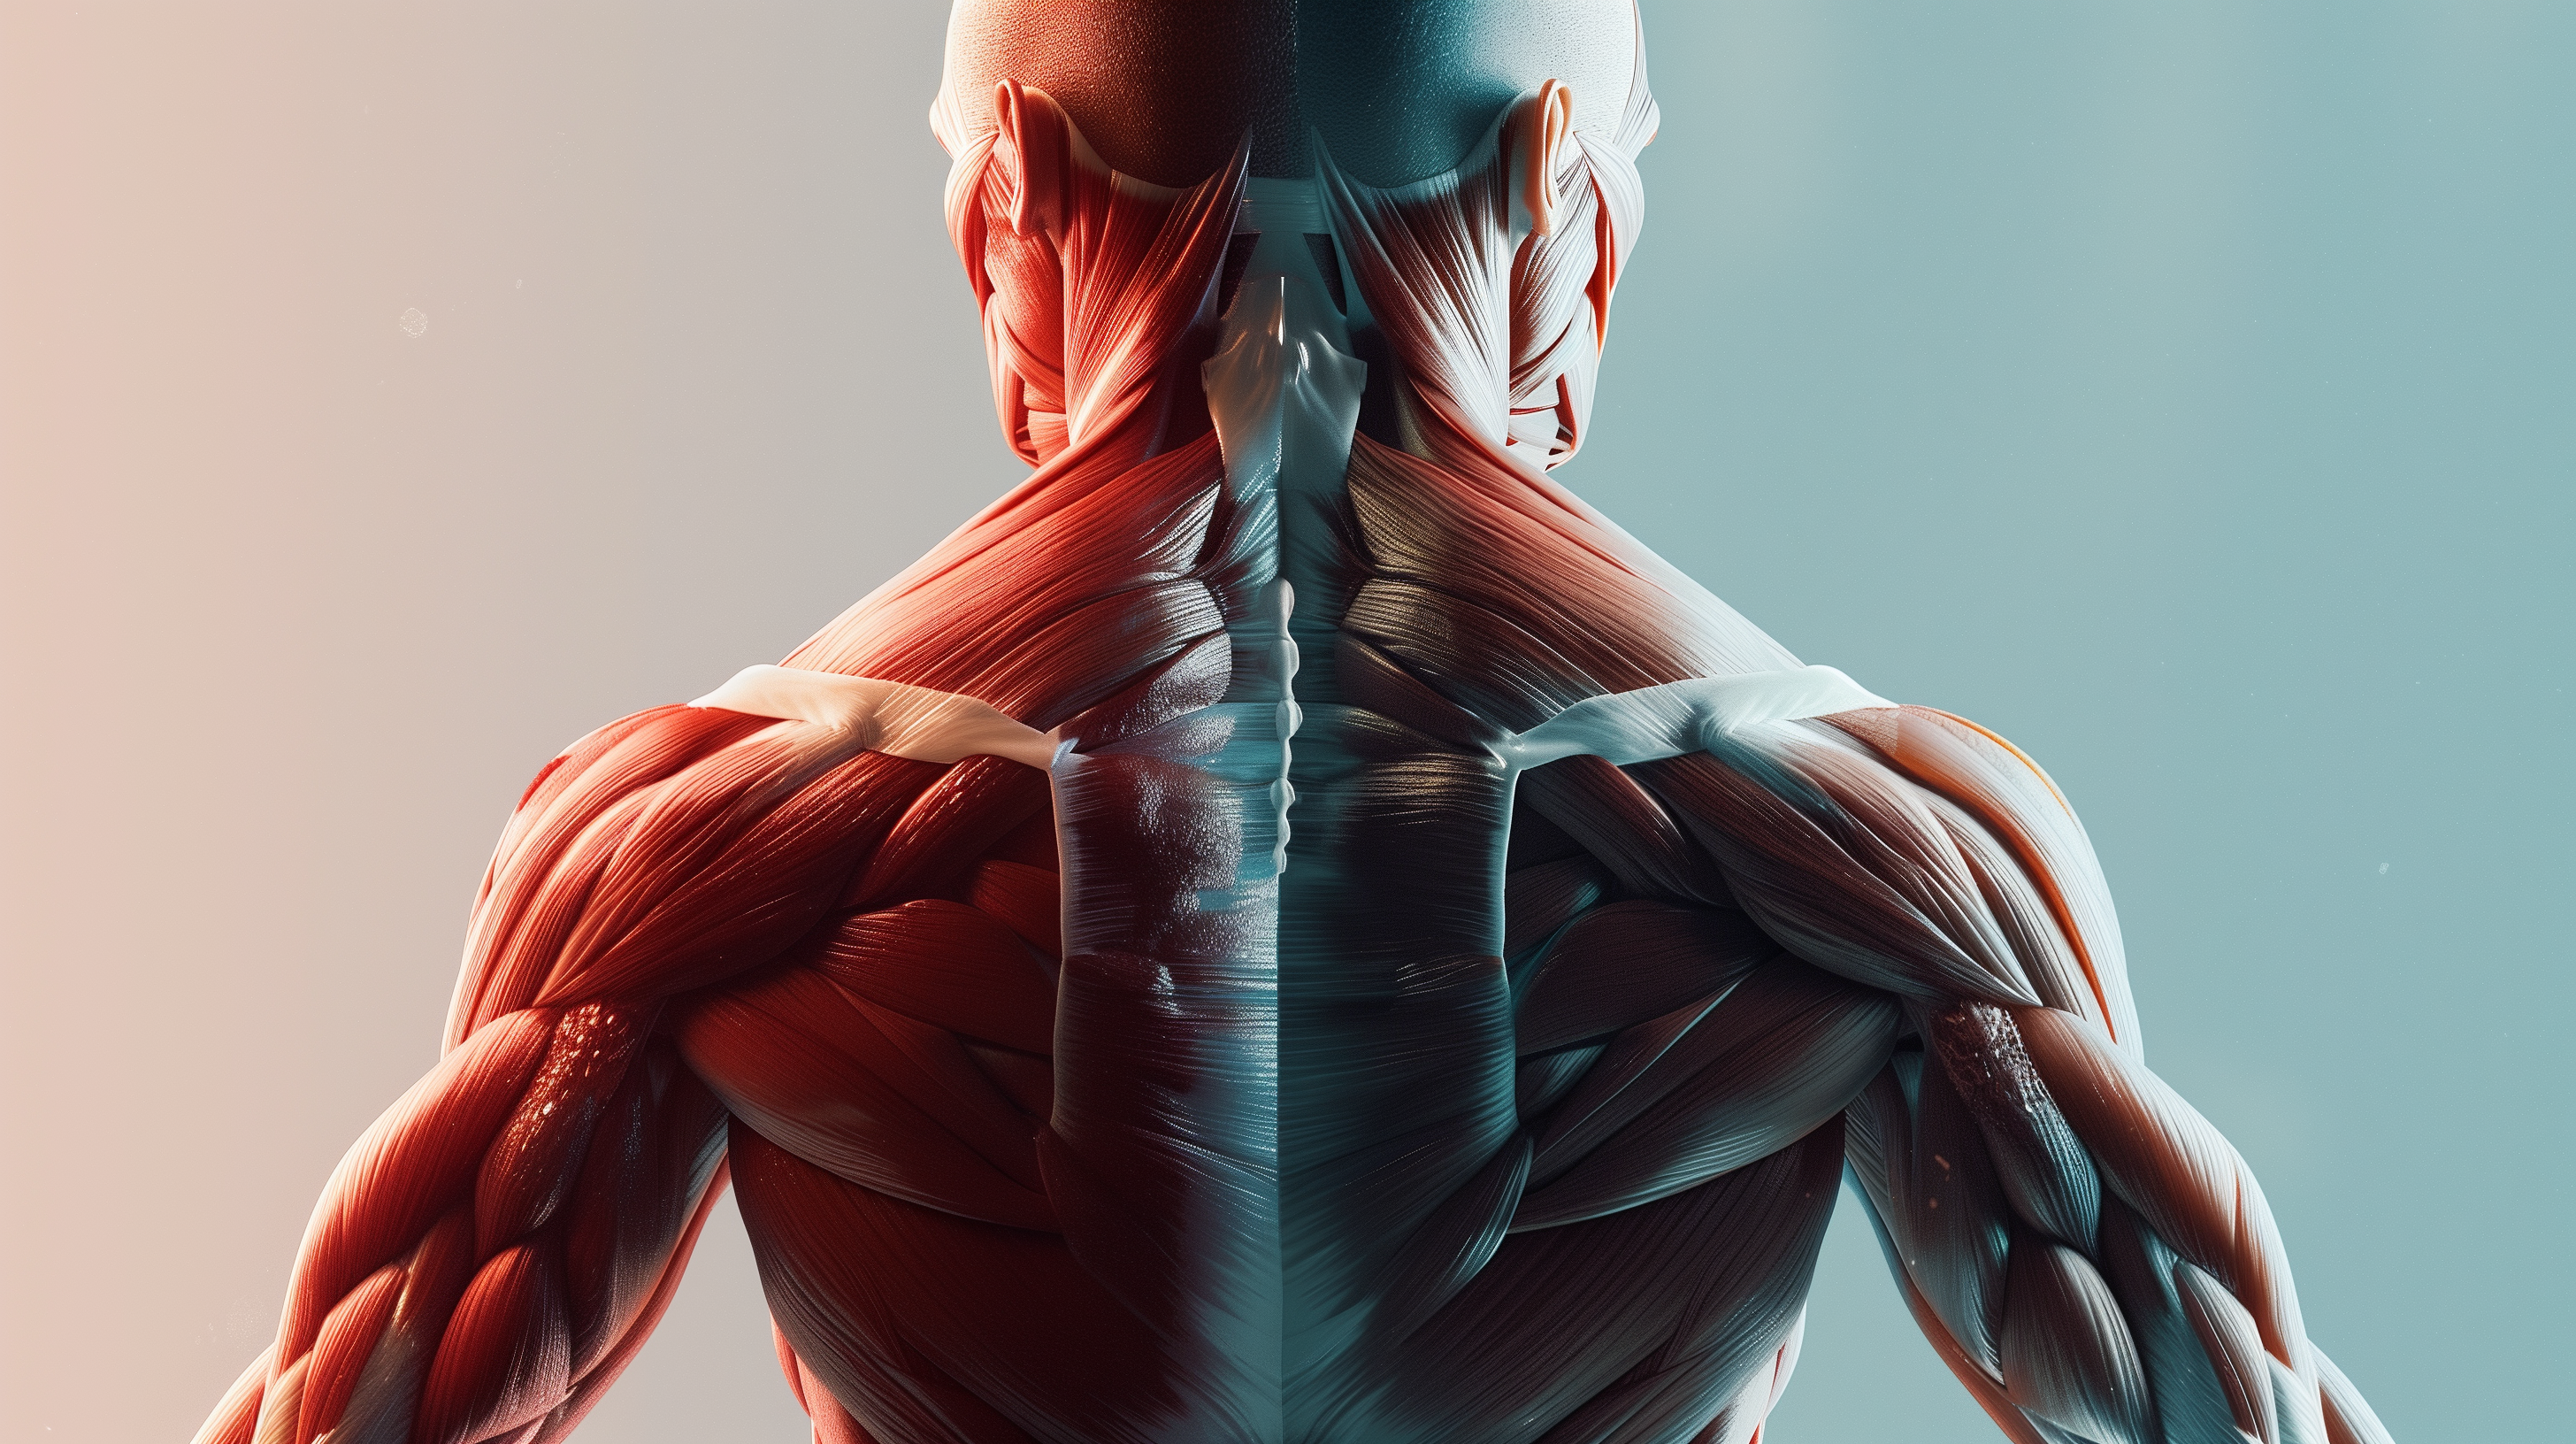 split image: on one side, a vibrant, healthy muscle fiber; on the other side, a slightly distressed muscle